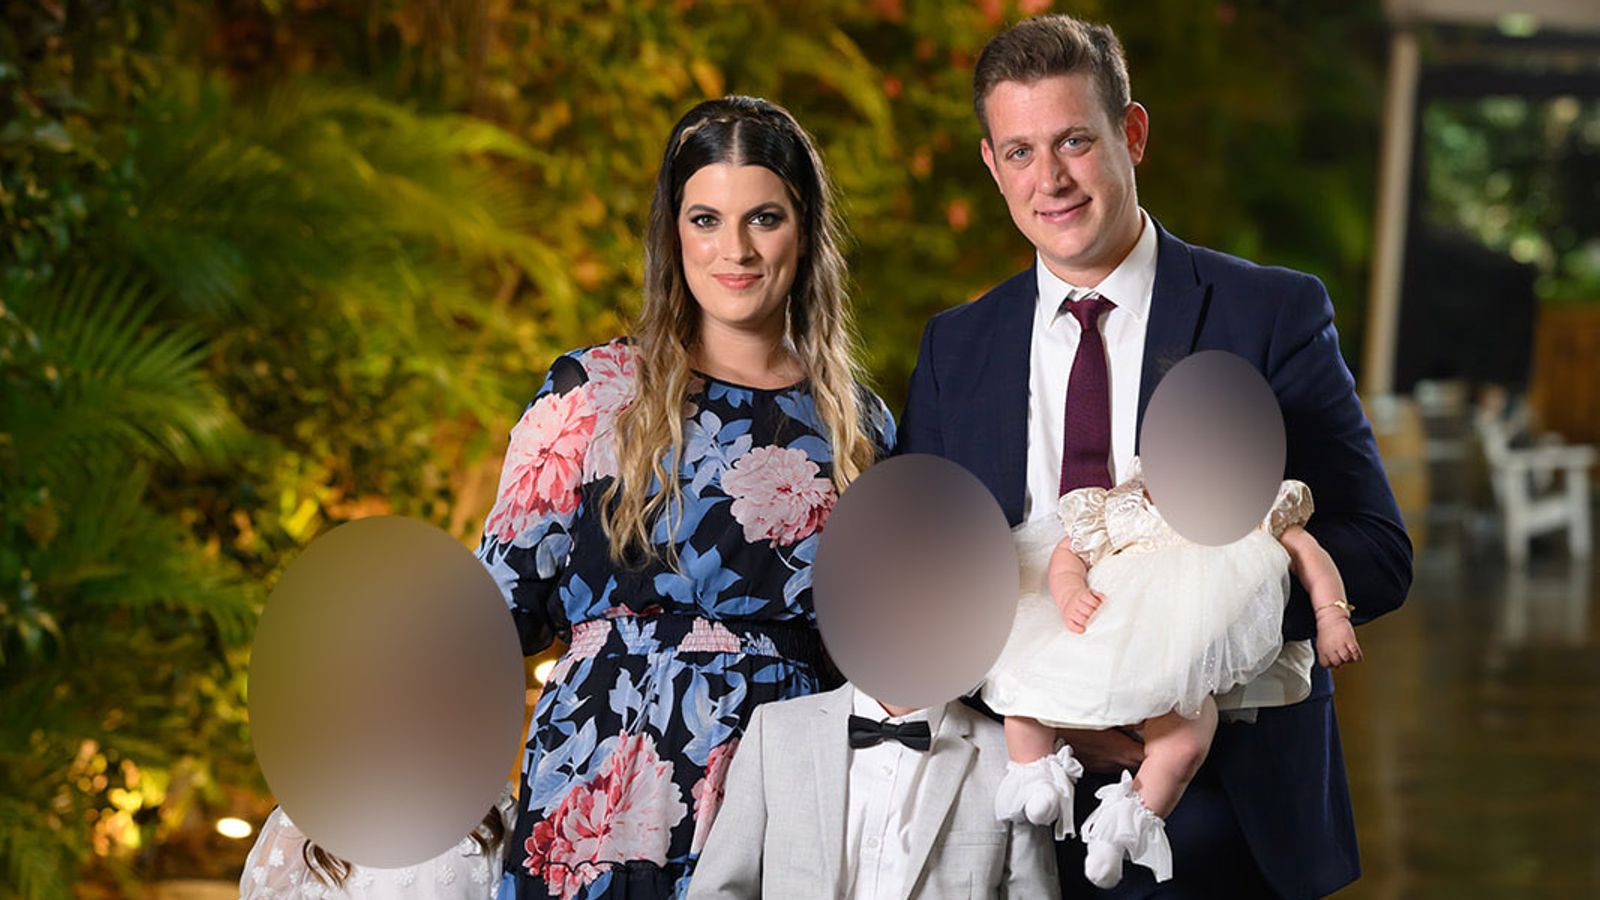 'Being Jewish in UK is getting worse': Father's anger after baby's birth certificate 'defaced'